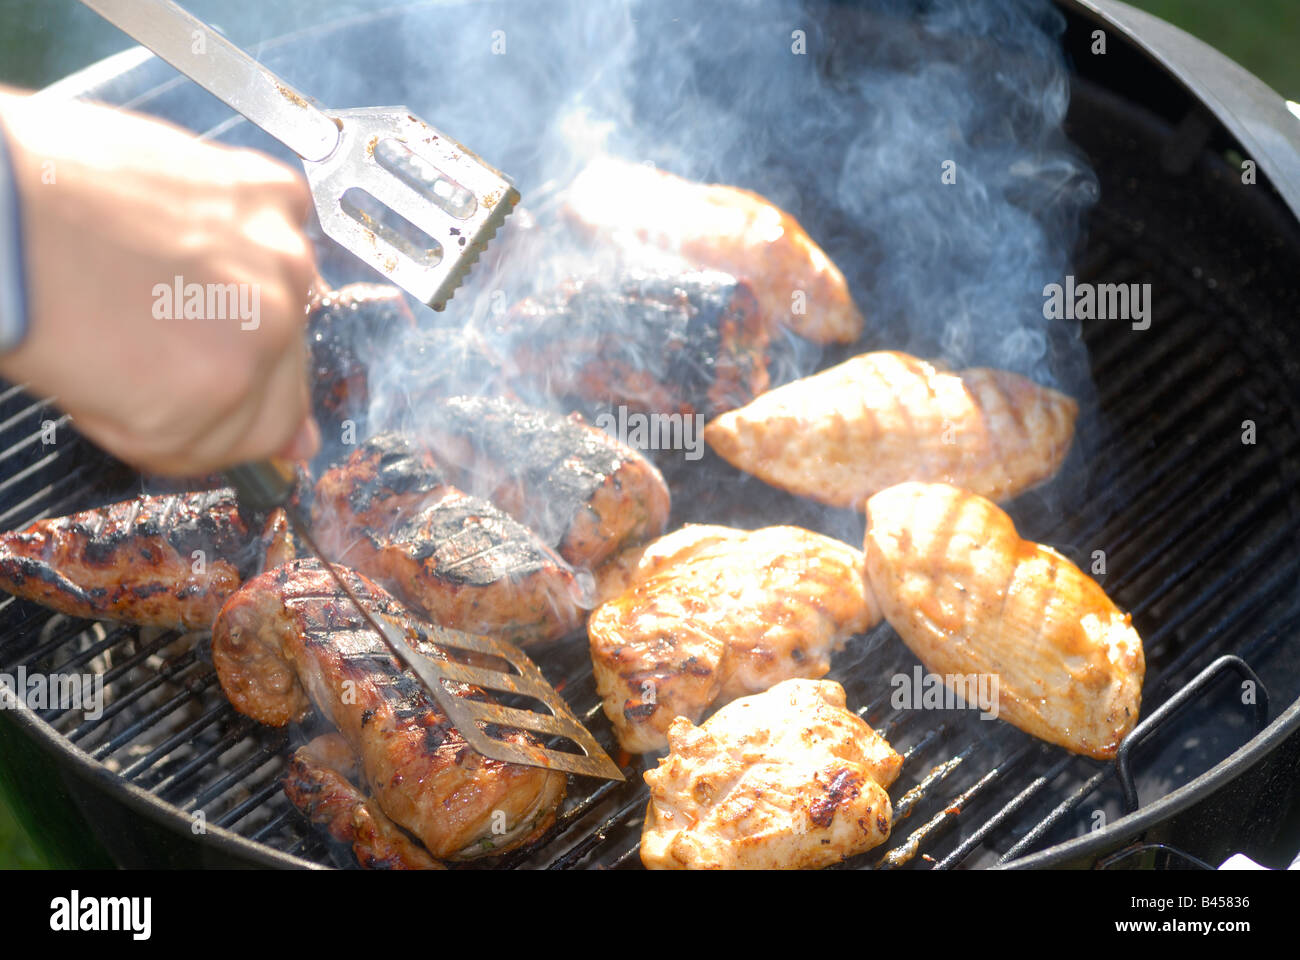 barbecue on summer night, Sweden Stock Photo